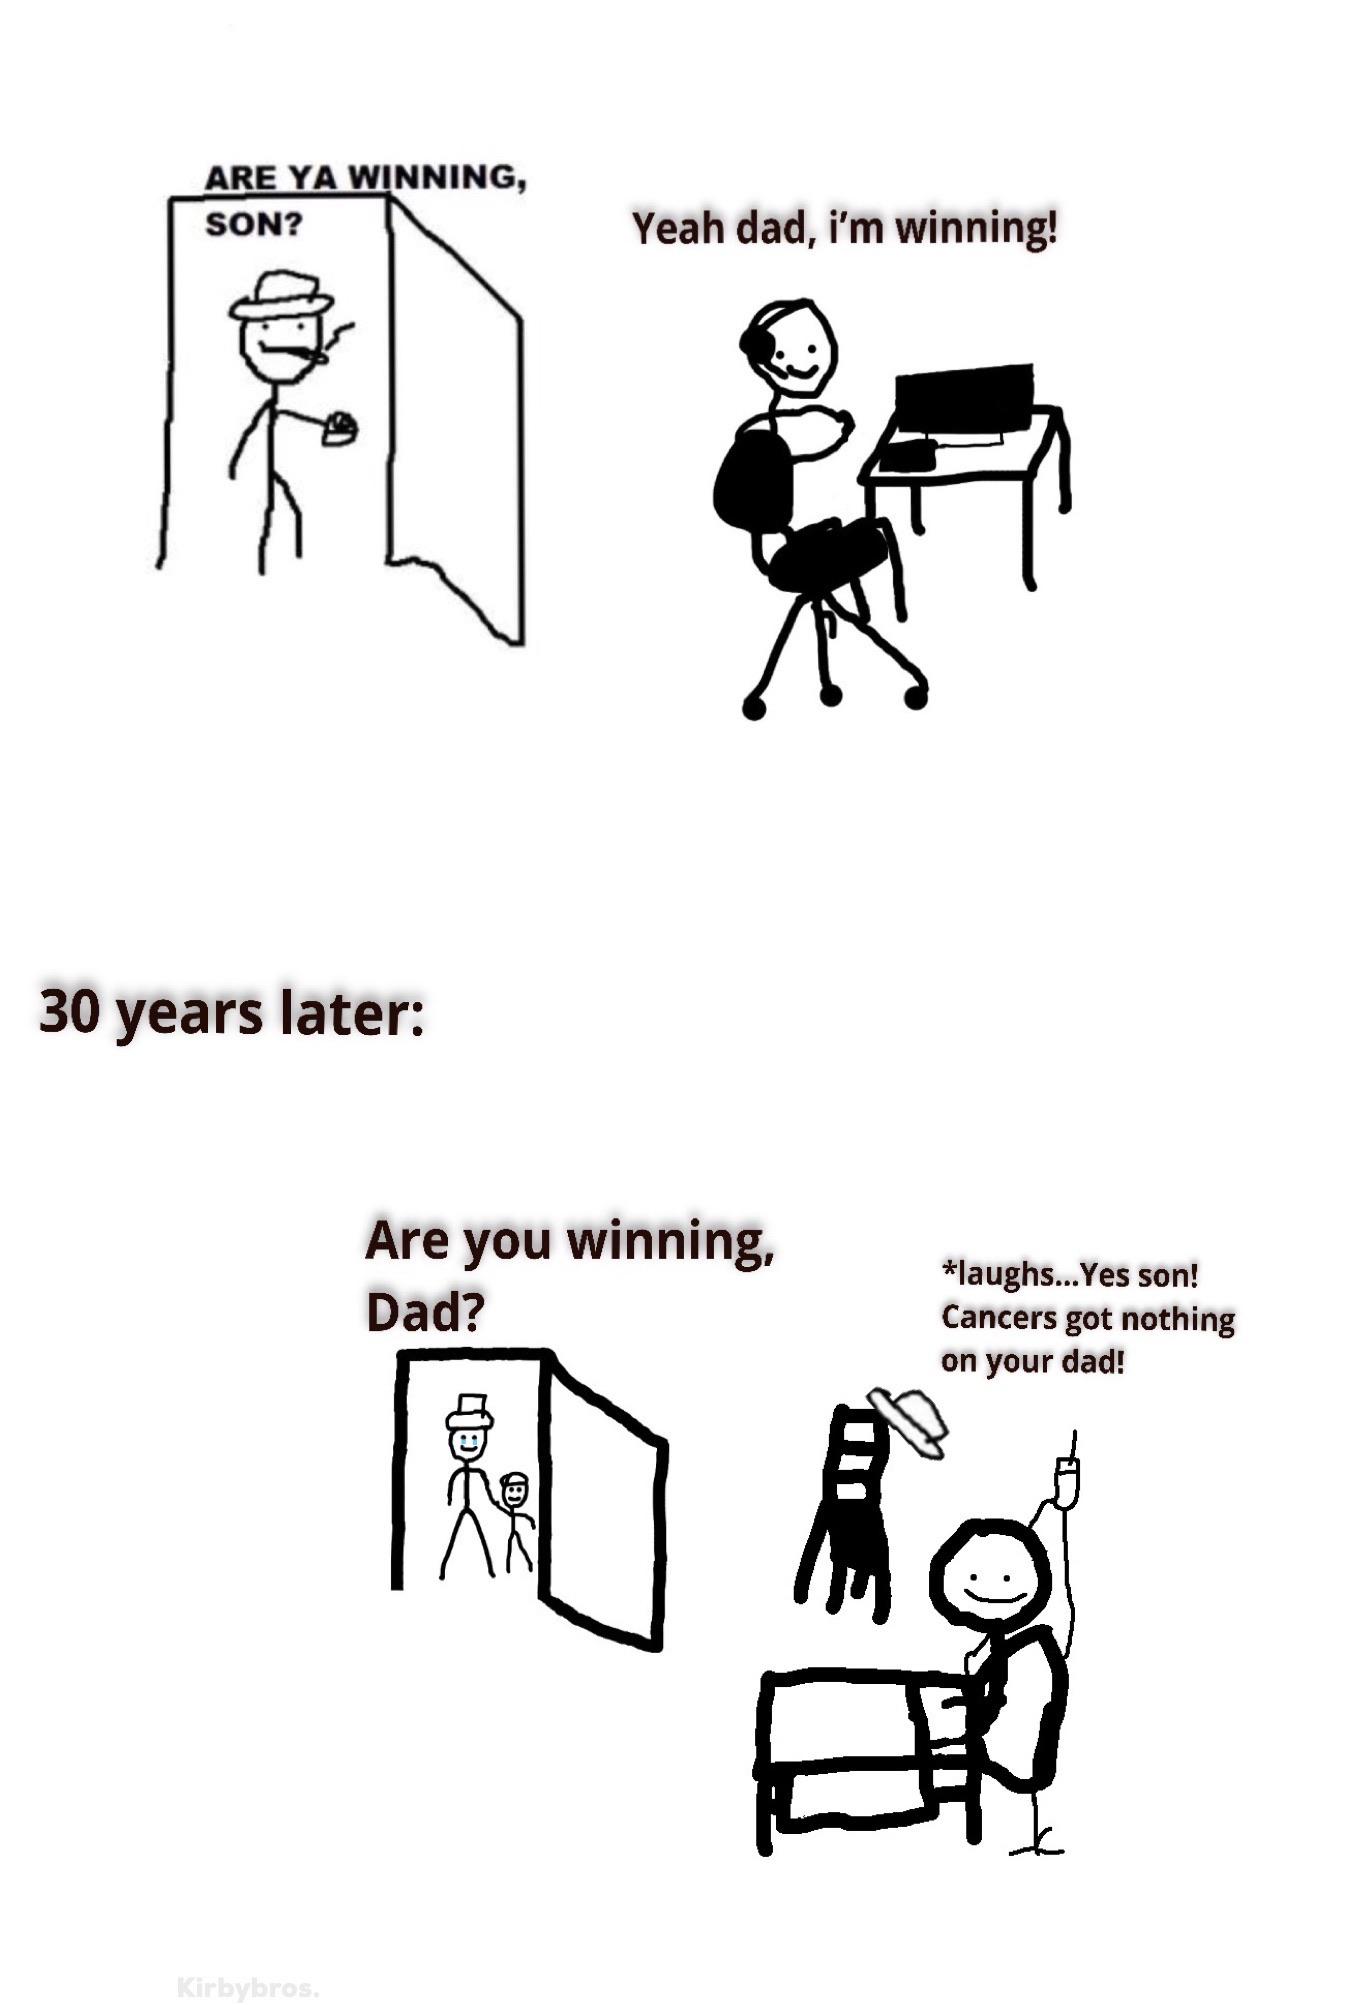 Wholesome memes,  Wholesome Memes Wholesome memes,  text: ARE YA WINNING, SON? 30 years later: Yeah dad, i'm winning! Are you winning, Dad? *laughs...Yes son! Cancers got nothing on your dad! 